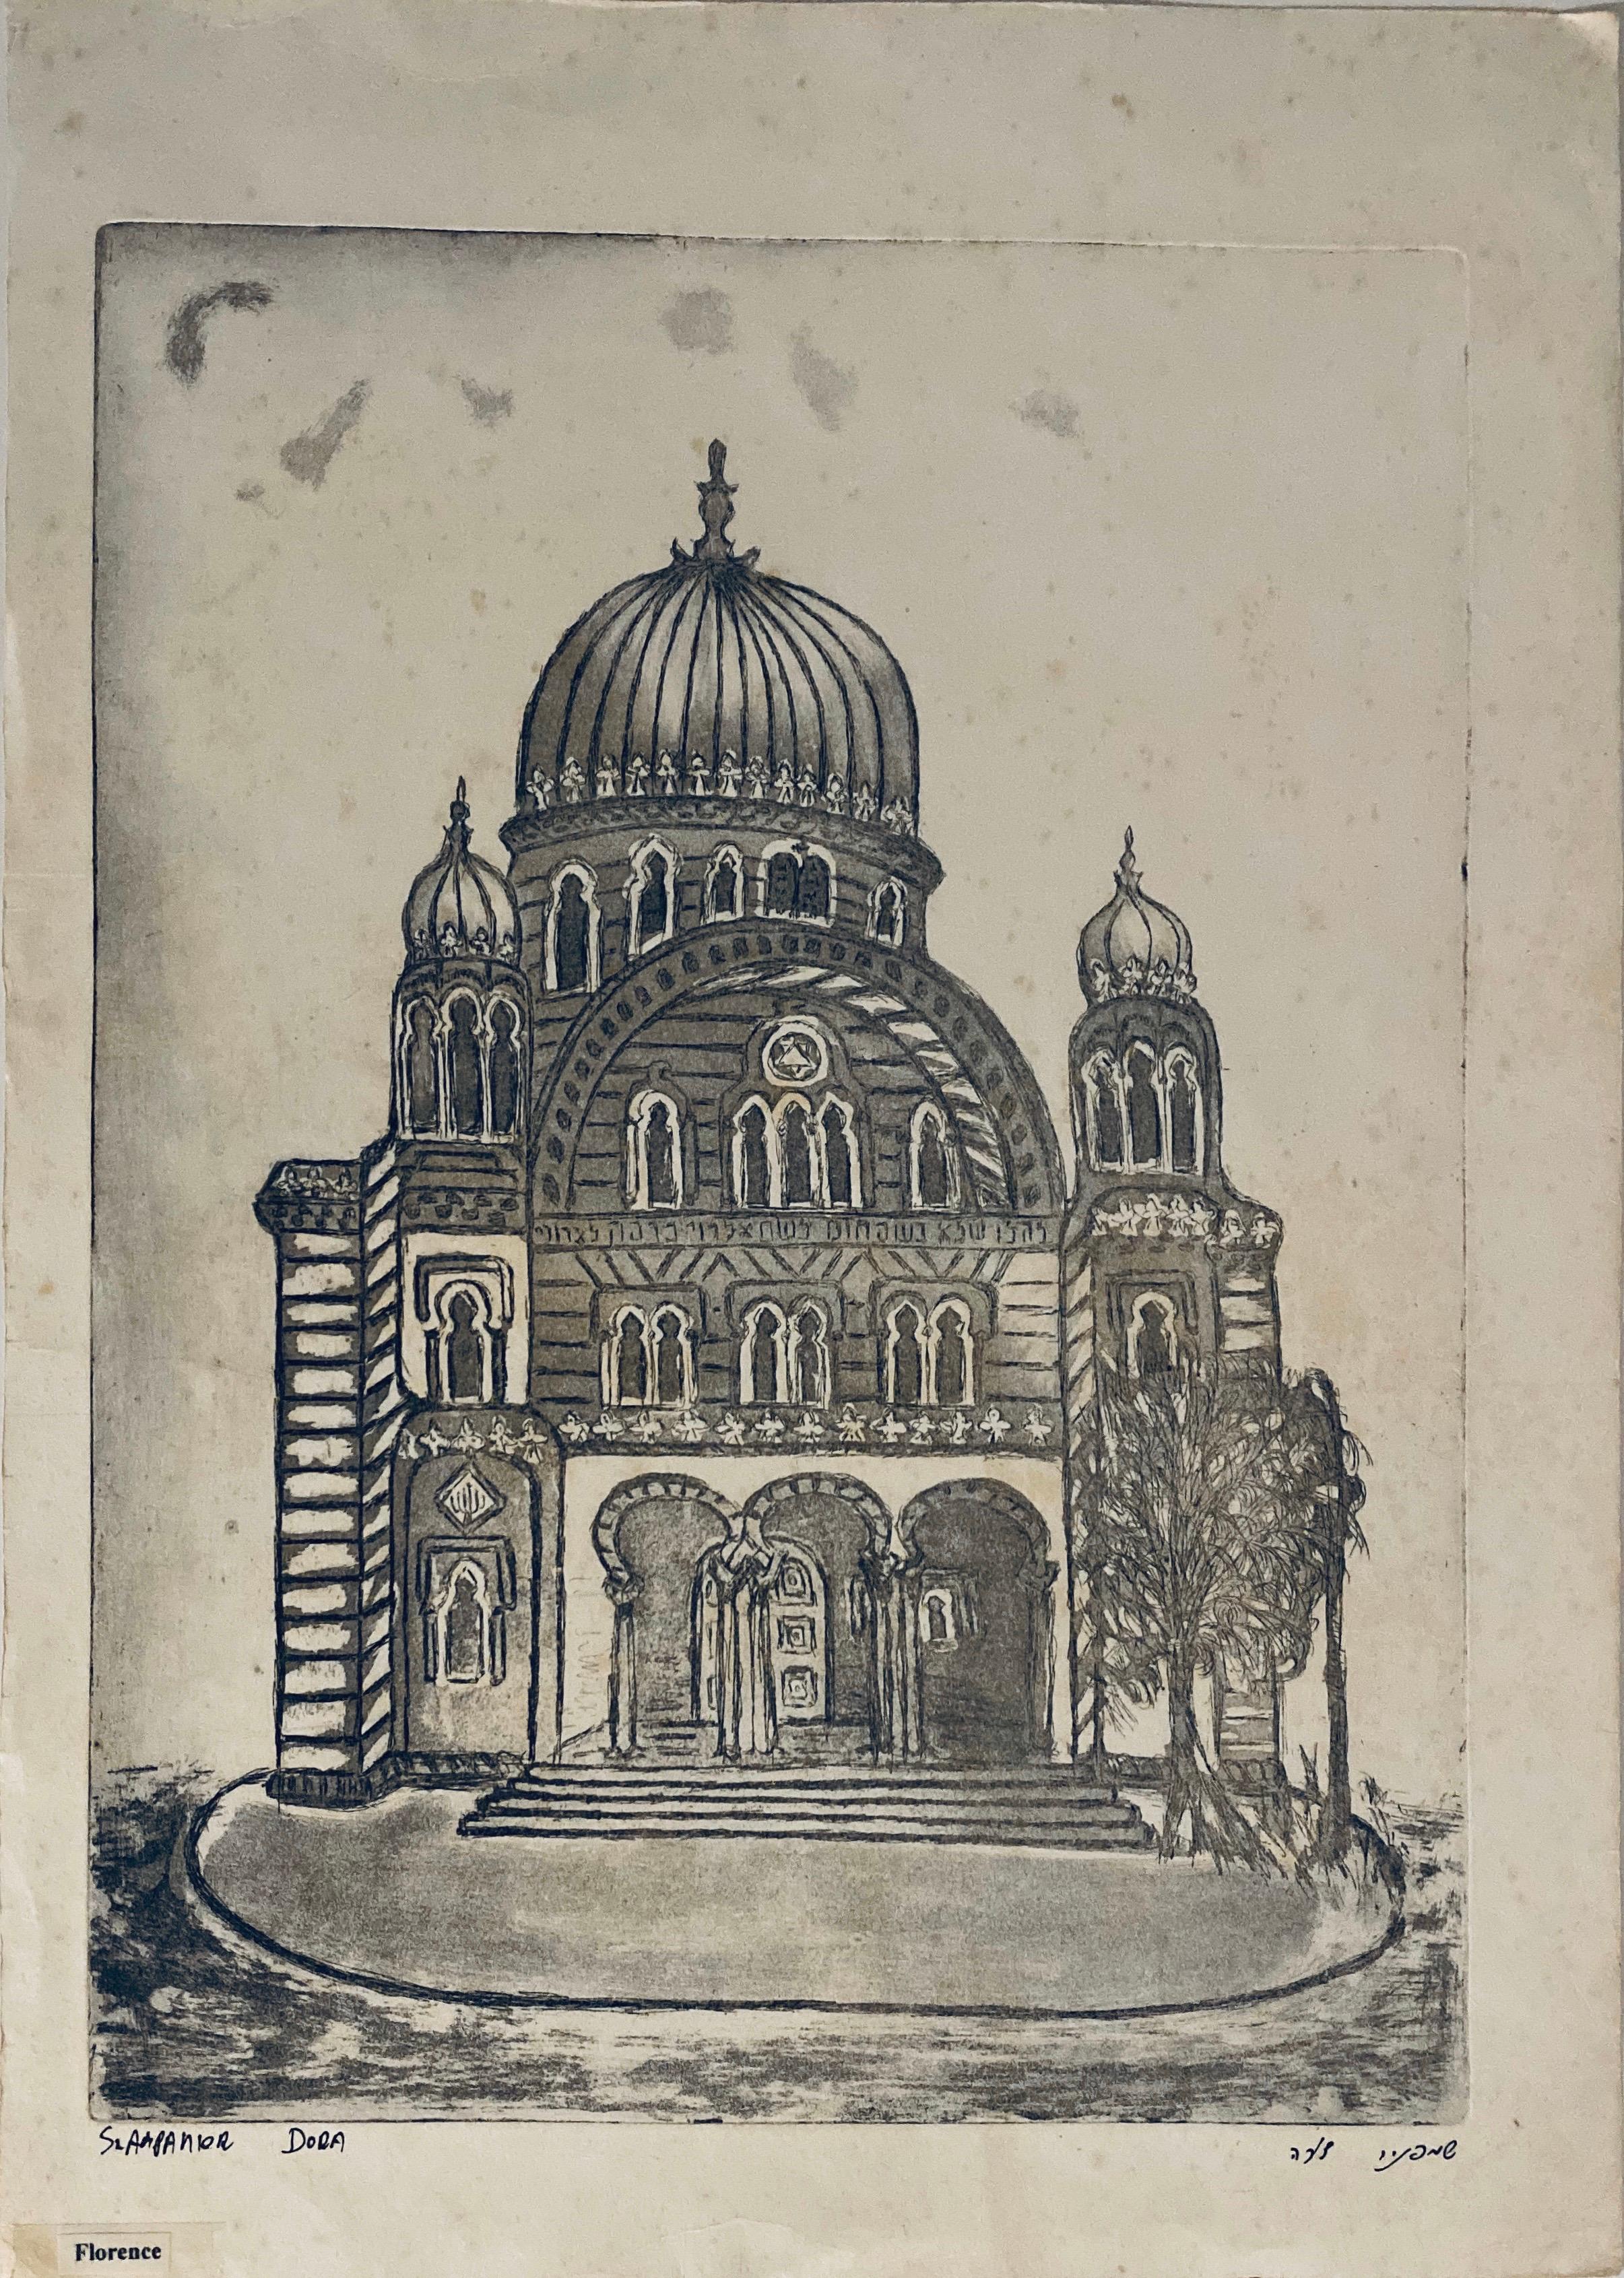 Dora Szampanier Figurative Print - Etching of destroyed synagogue - Florence, Italy